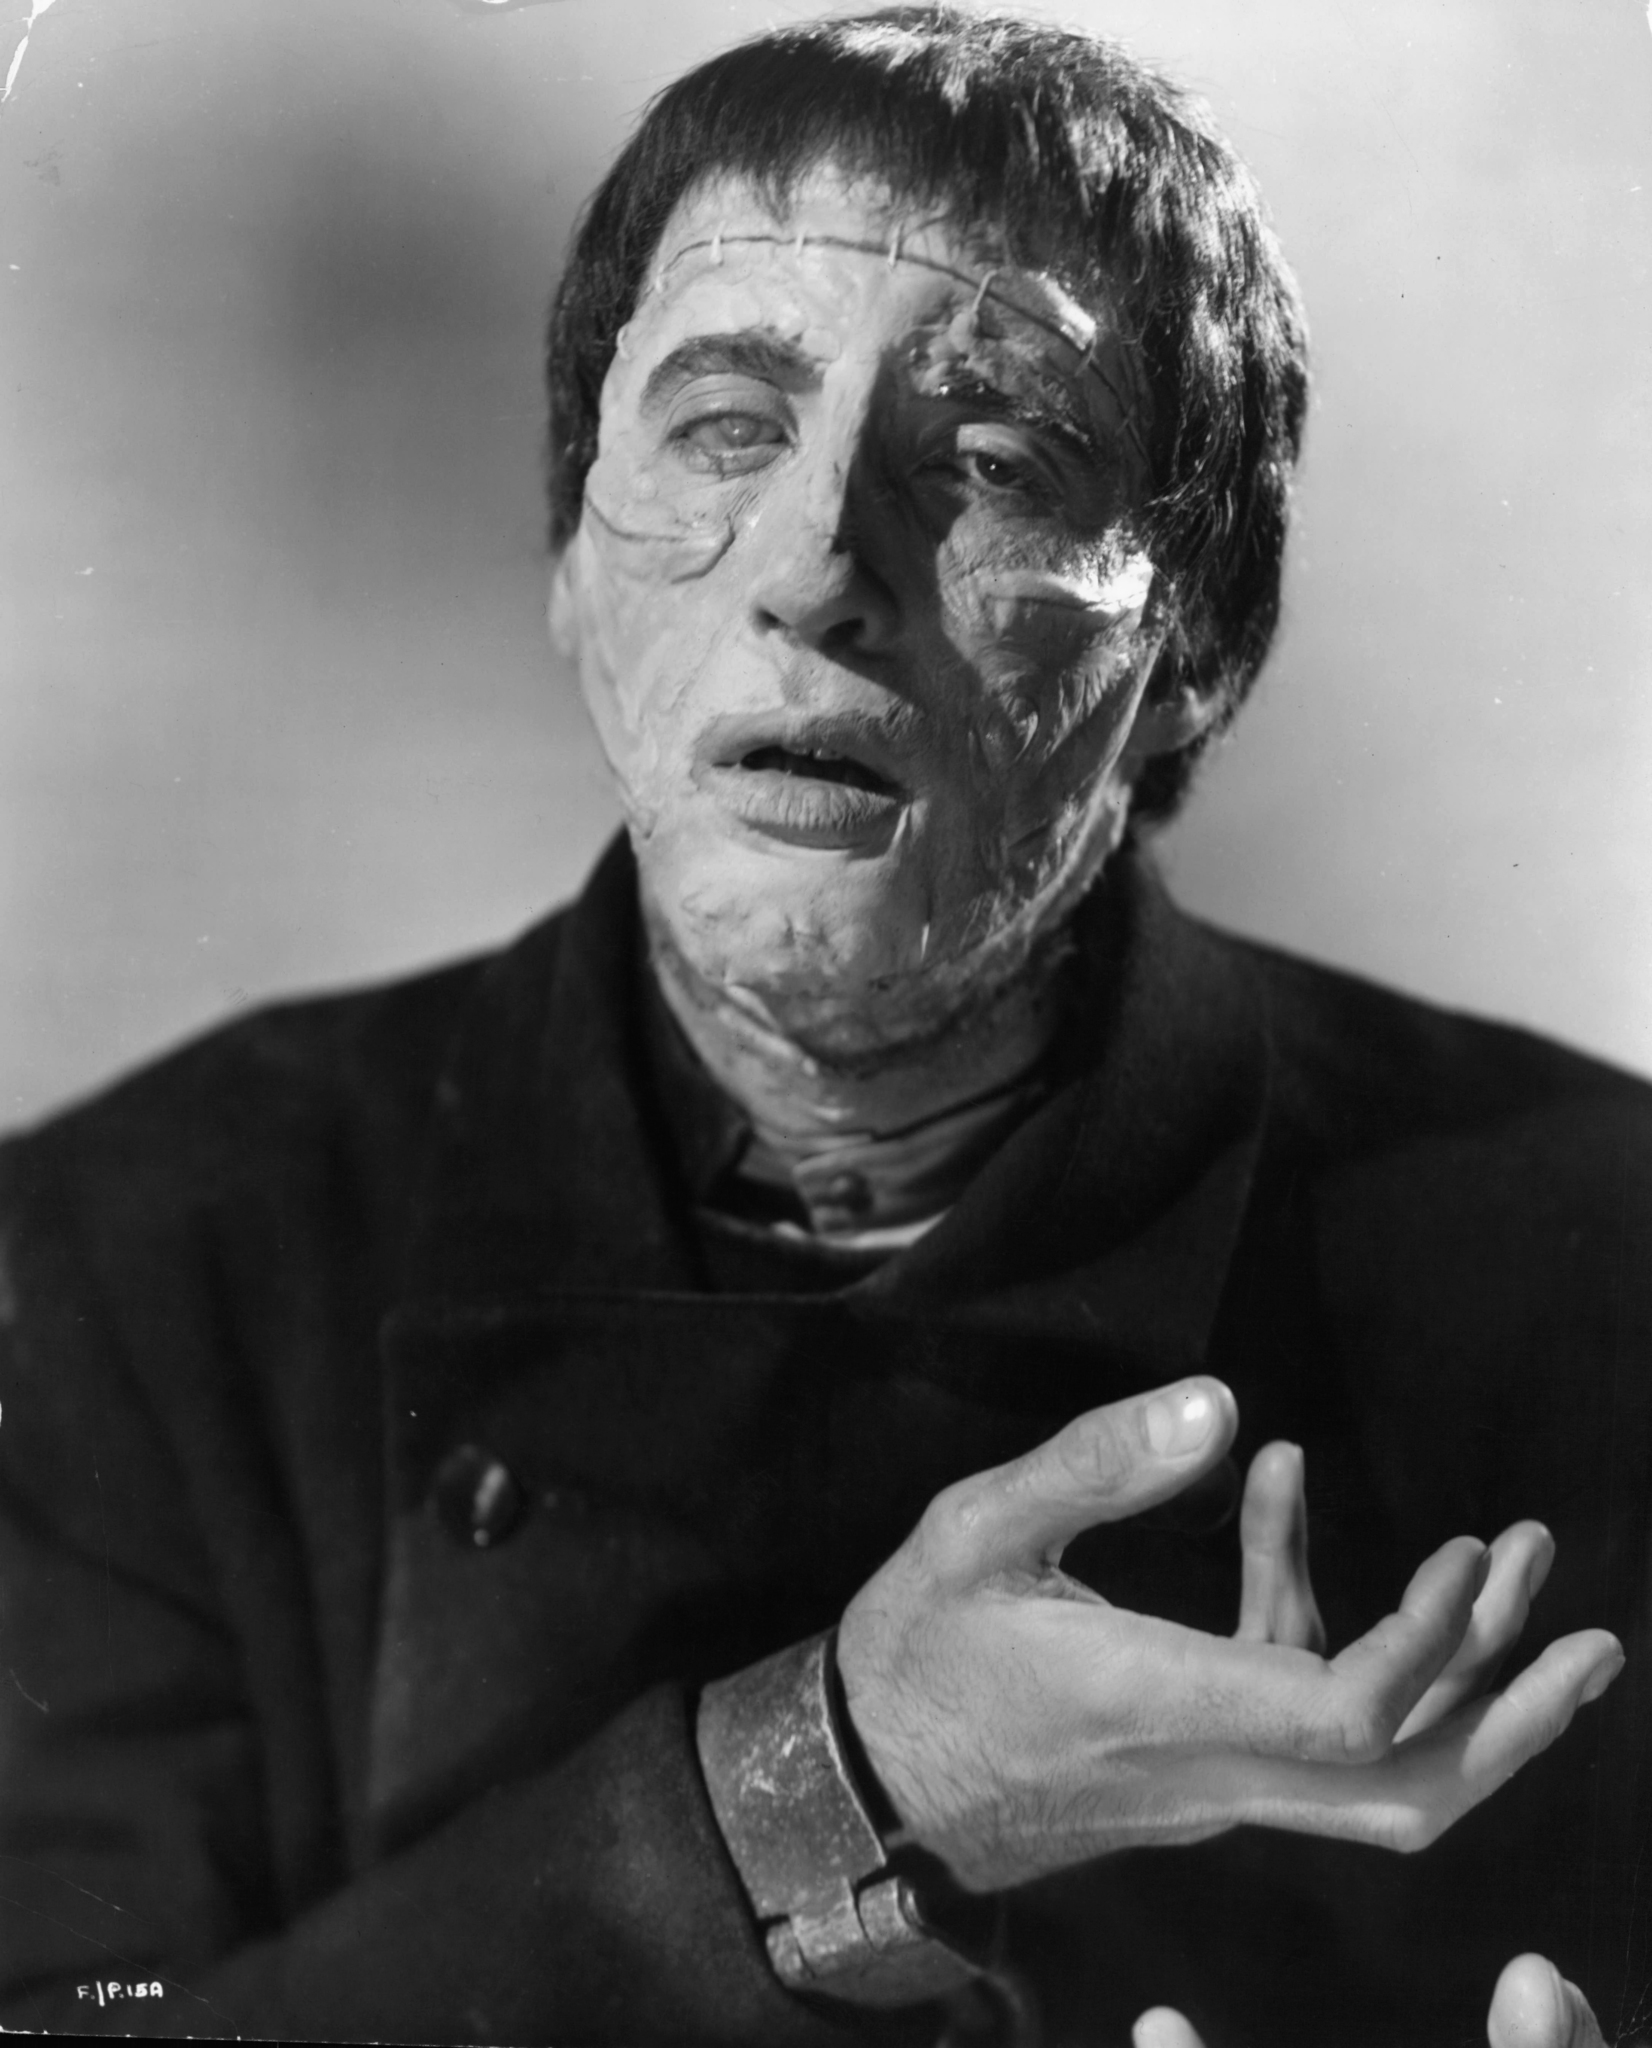 Christopher Lee at event of The Curse of Frankenstein (1957)